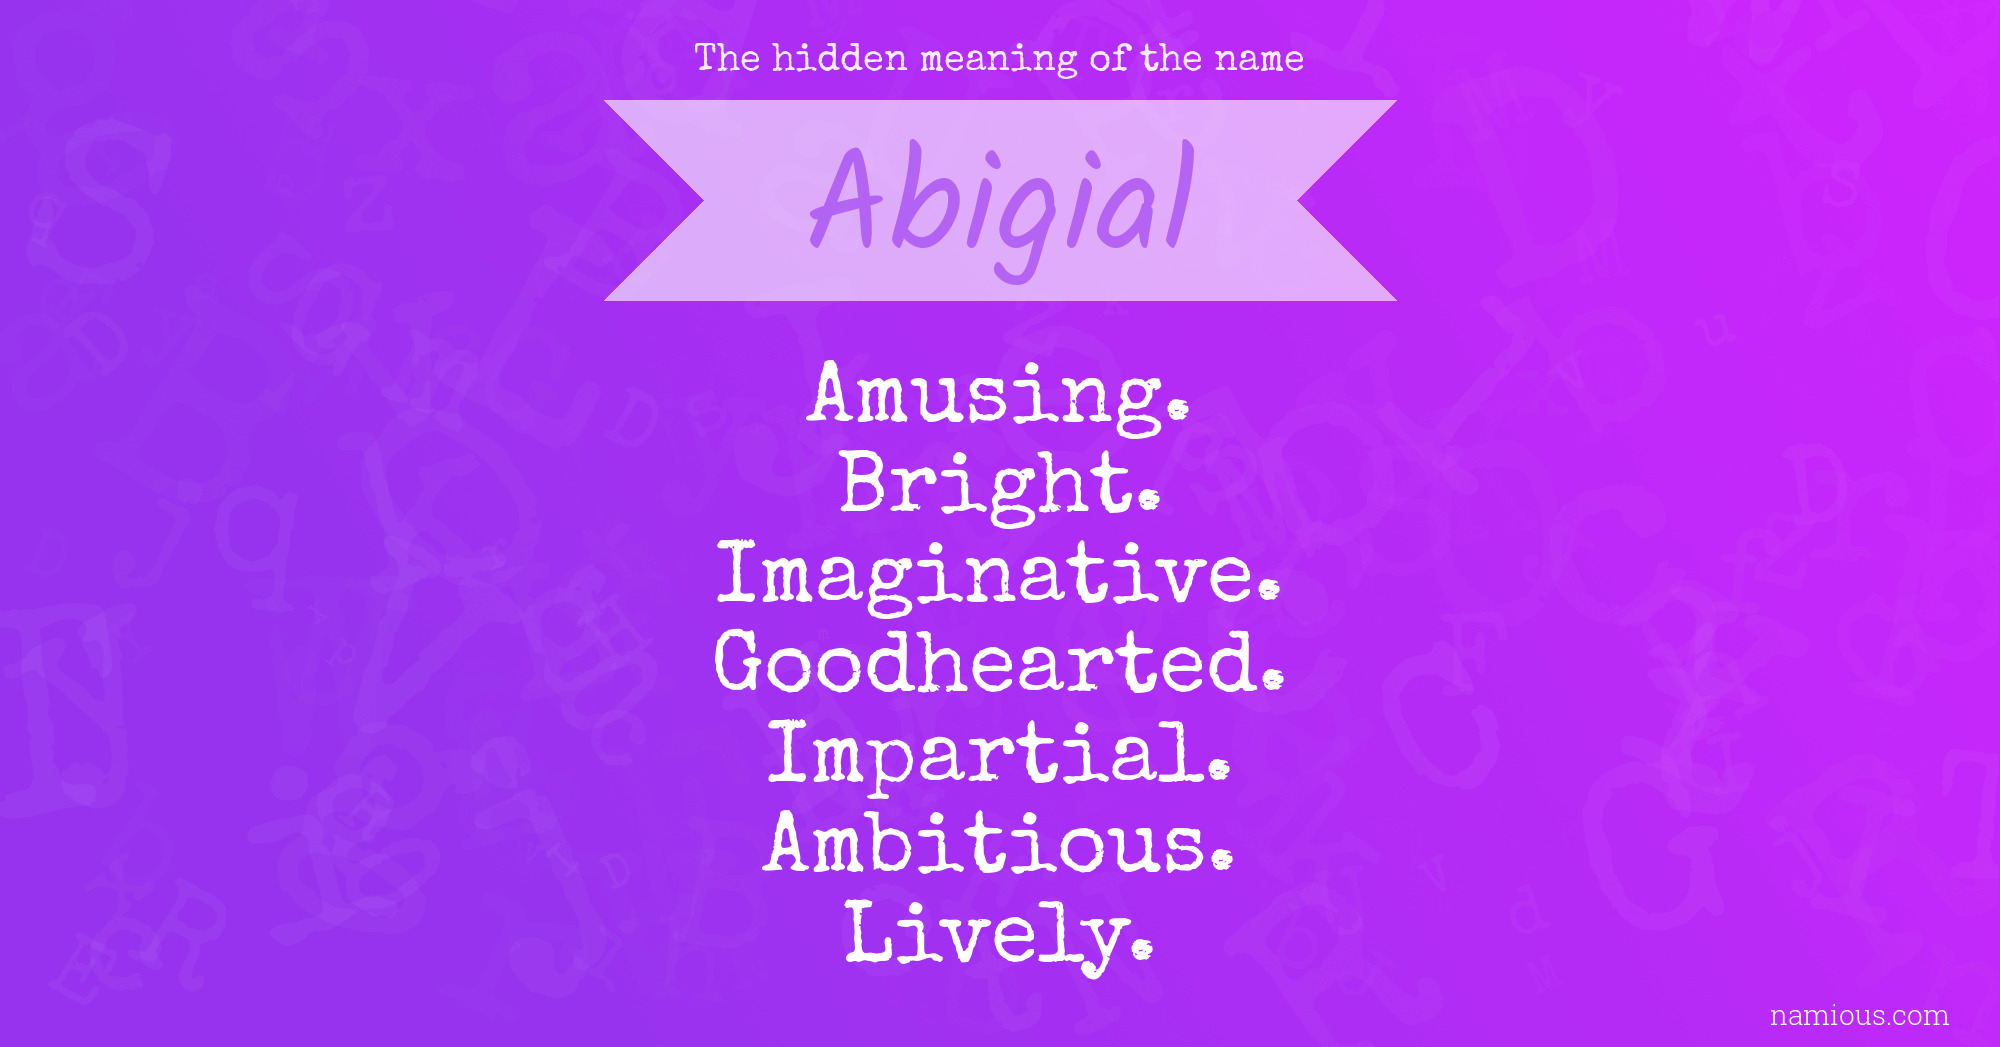 The hidden meaning of the name Abigial